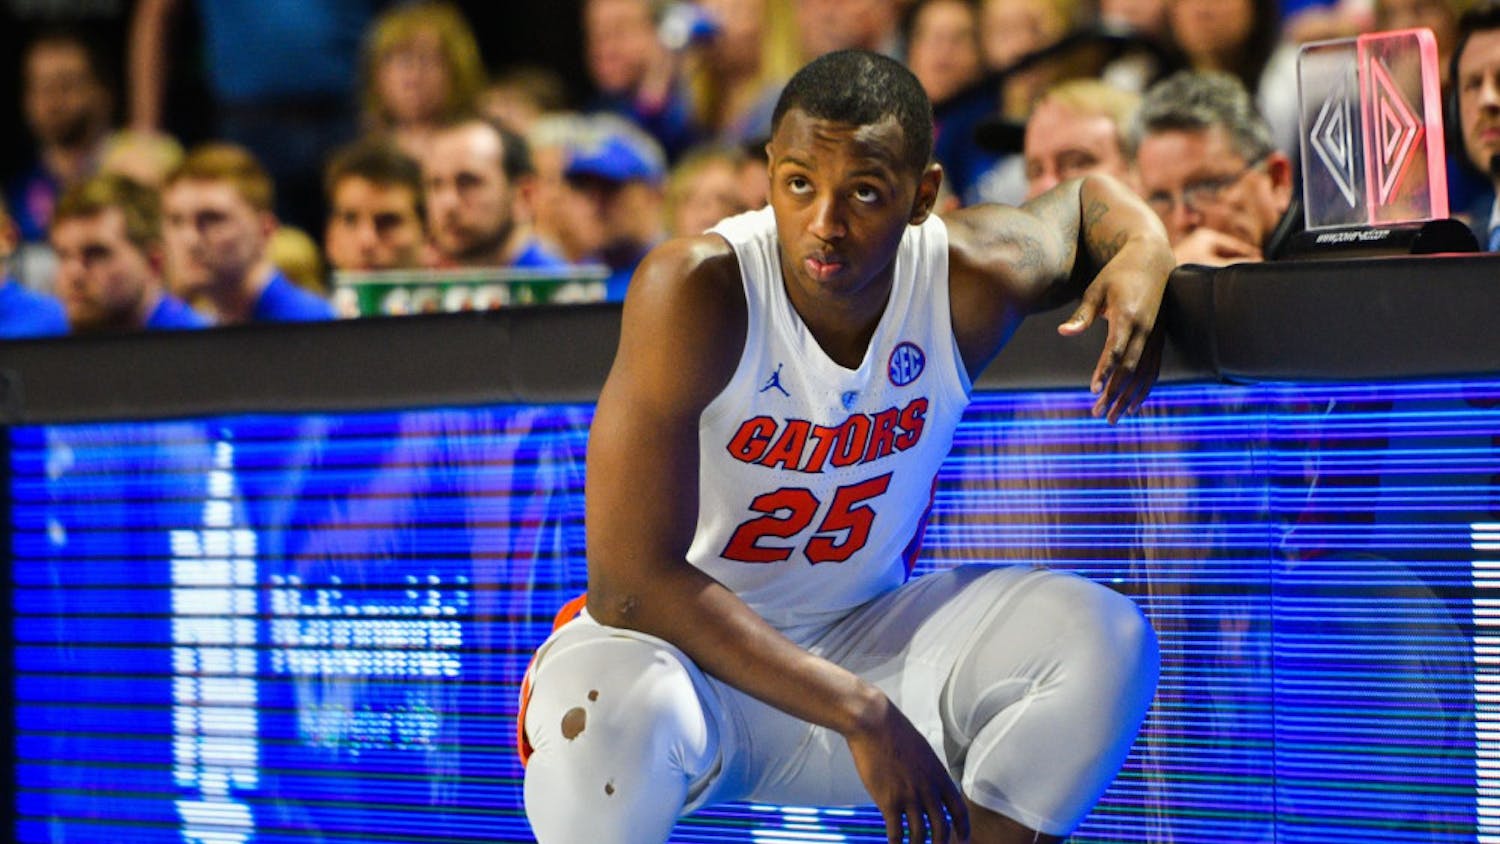 UF forward Keith Stone tore the ACL in his left knee against Georgia on Jan. 19.
&nbsp;